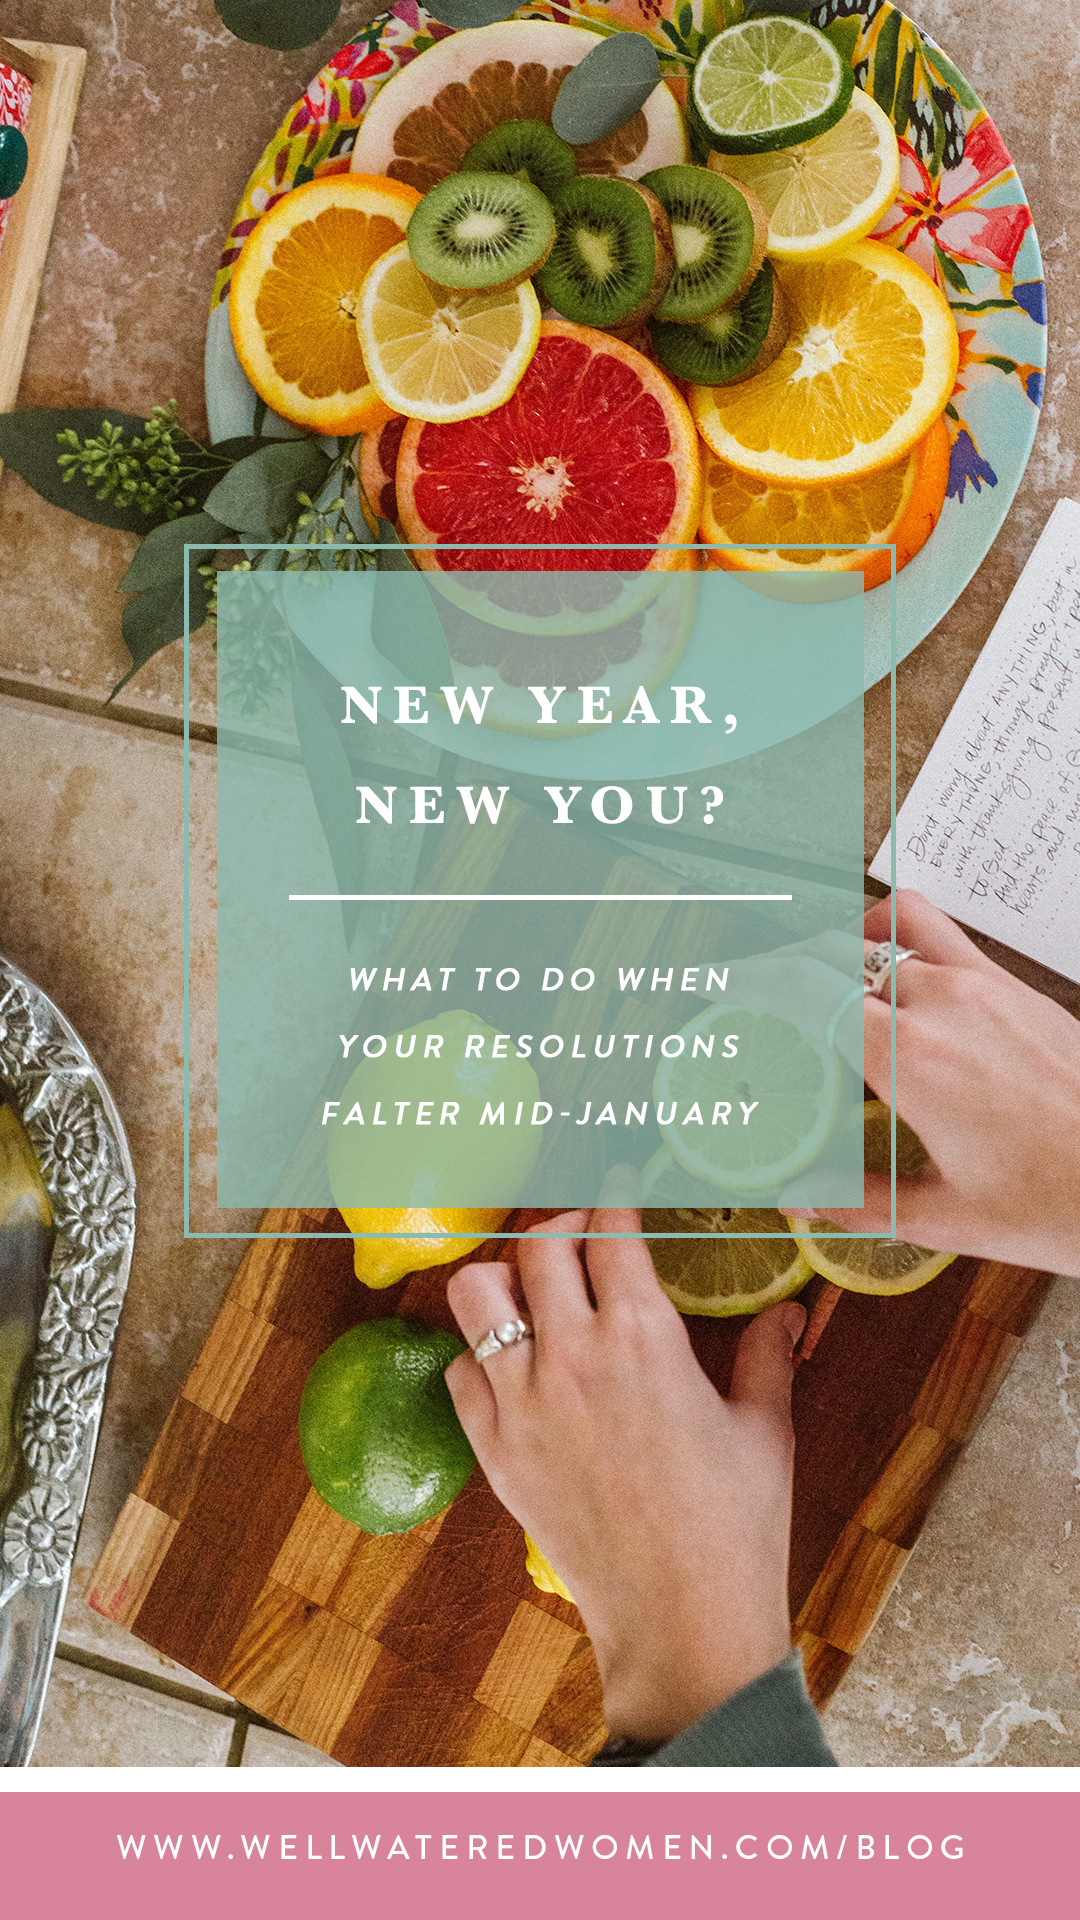 New Year, New You: What to do when your resolutions and goals falter mid-January